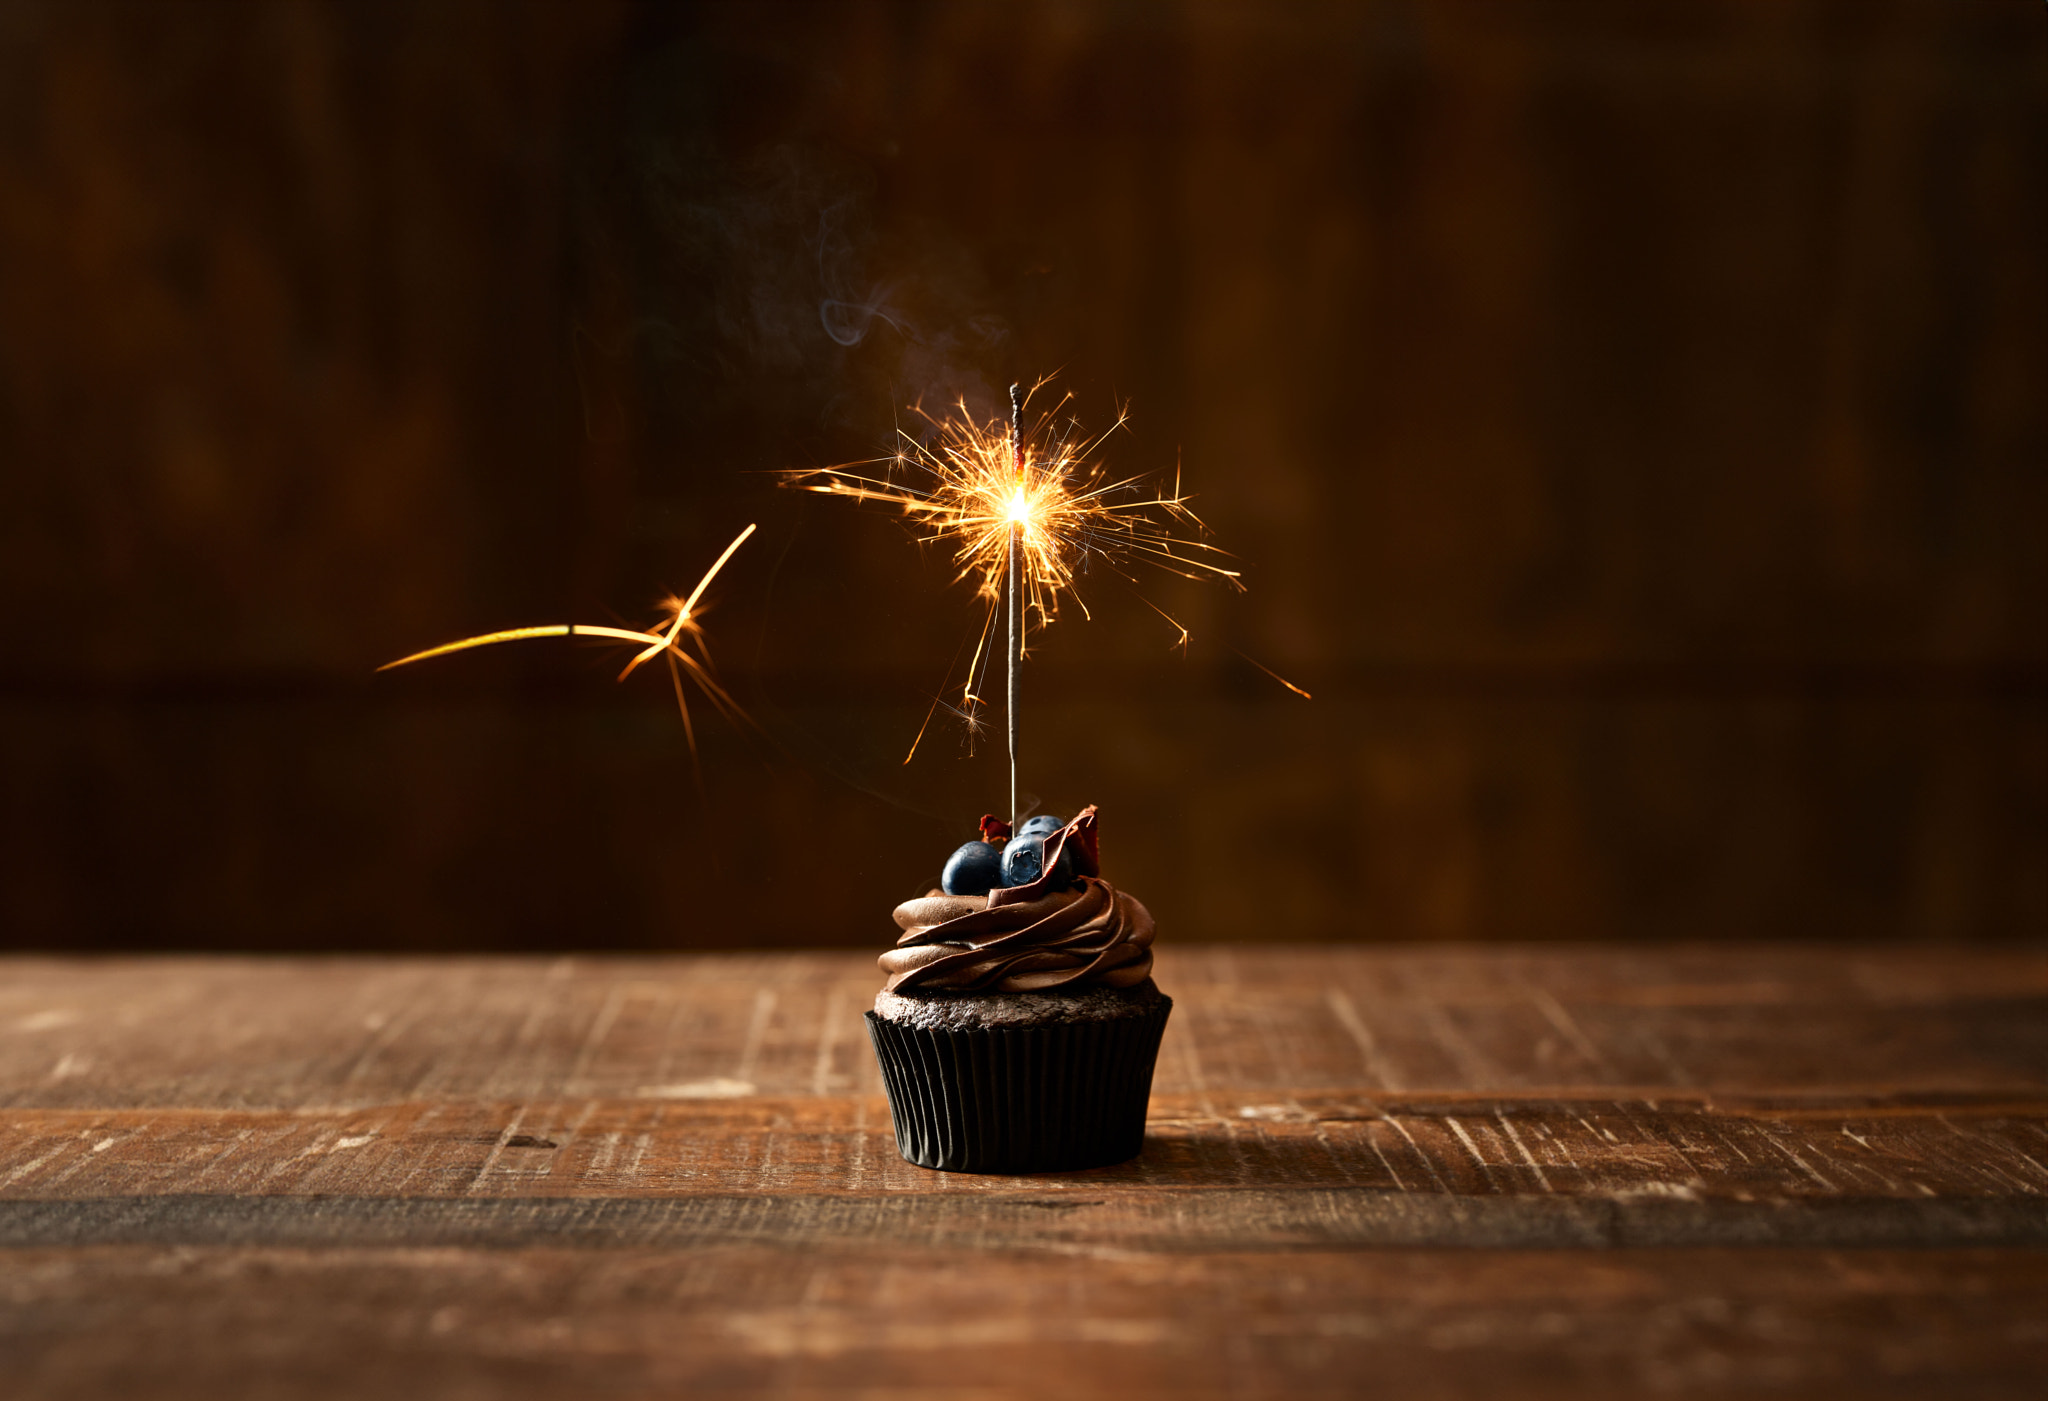 Chocolate cupcake with a sparkler on the table and brown background